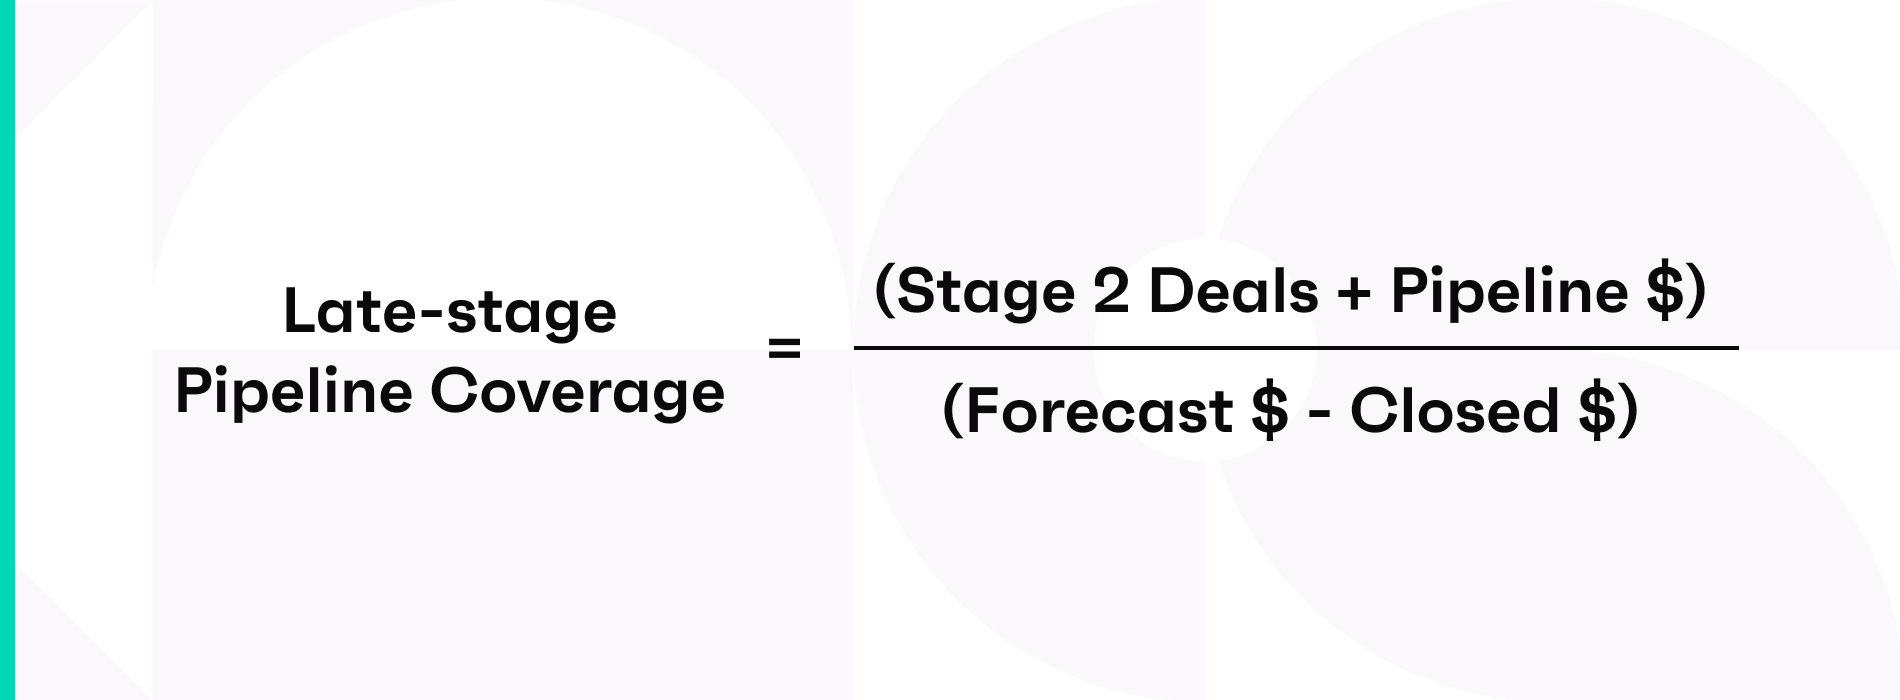 Late-stage pipeline coverage = (Stage 2 deals + Pipeline $) / (Forecast $ - Closed $)